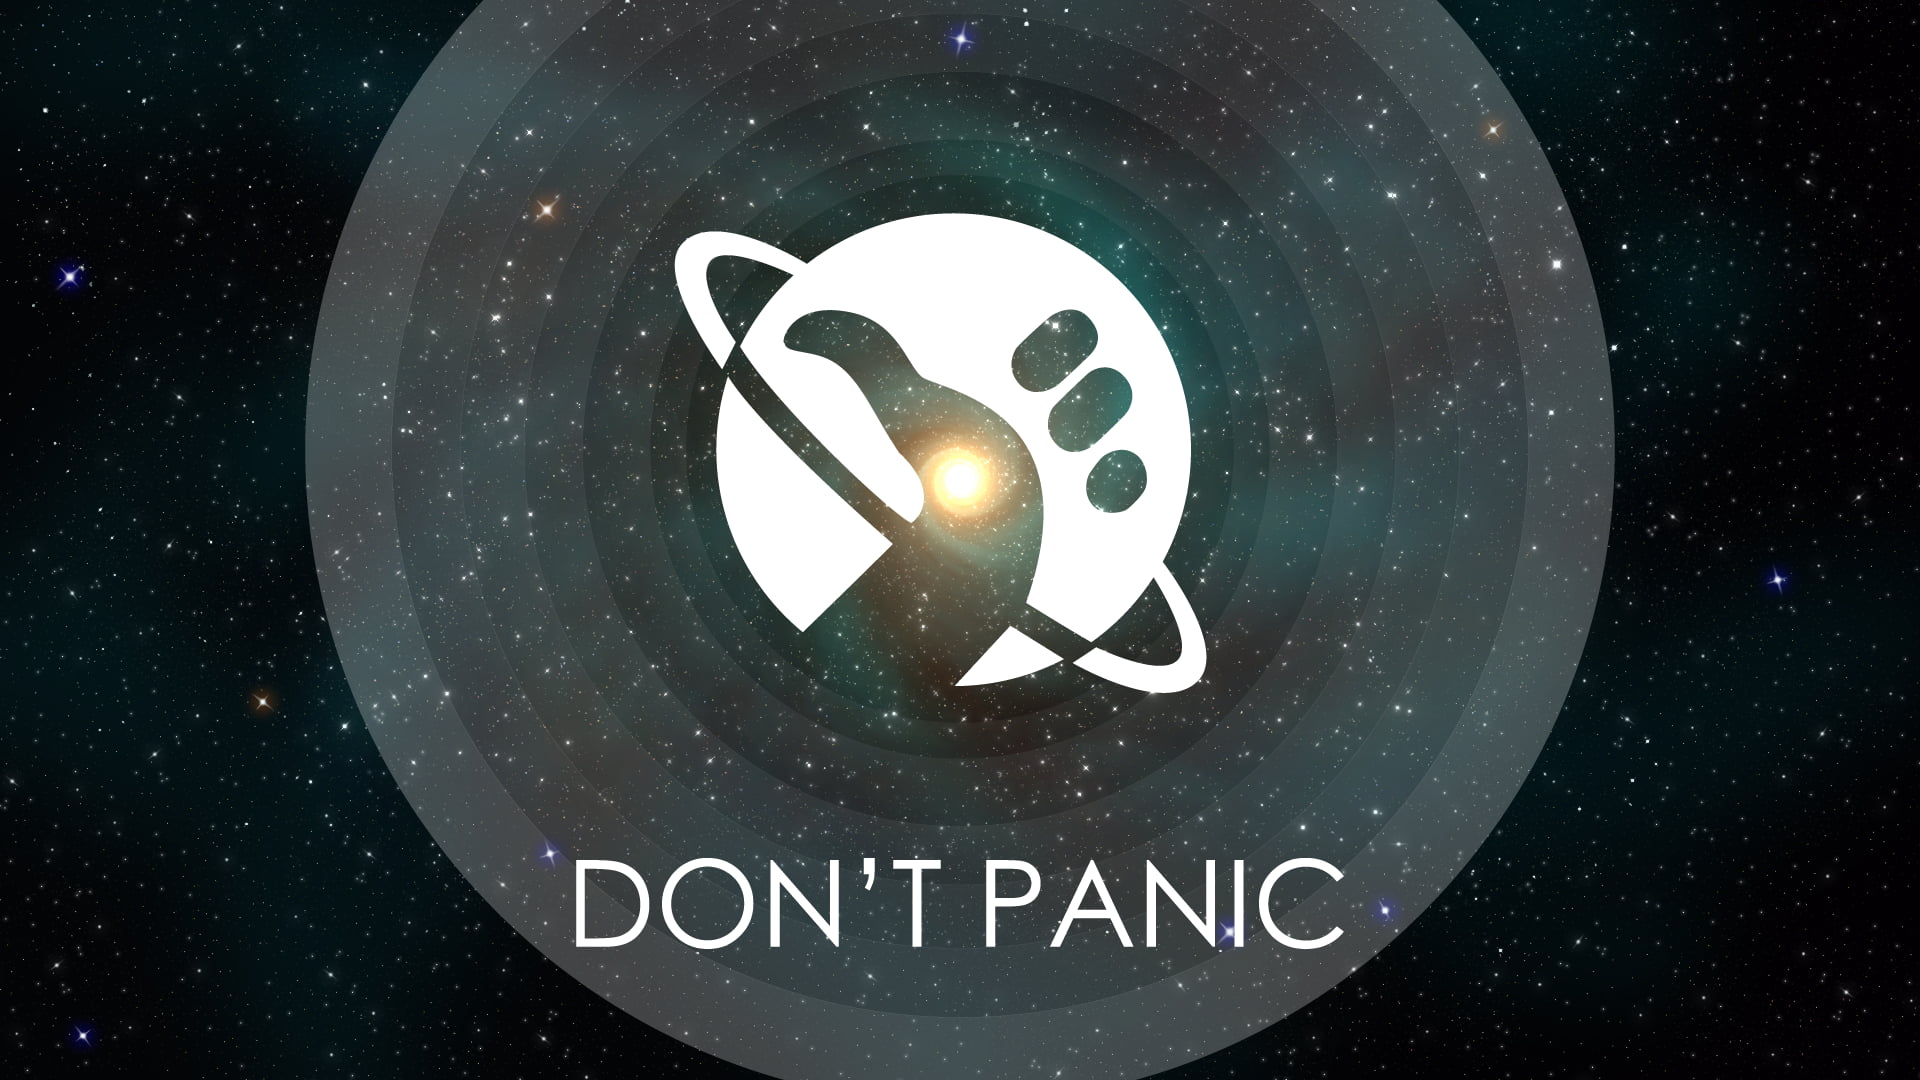 the-hitchhiker-s-guide-to-the-galaxy-logo-don-t-wallpaper.jpg